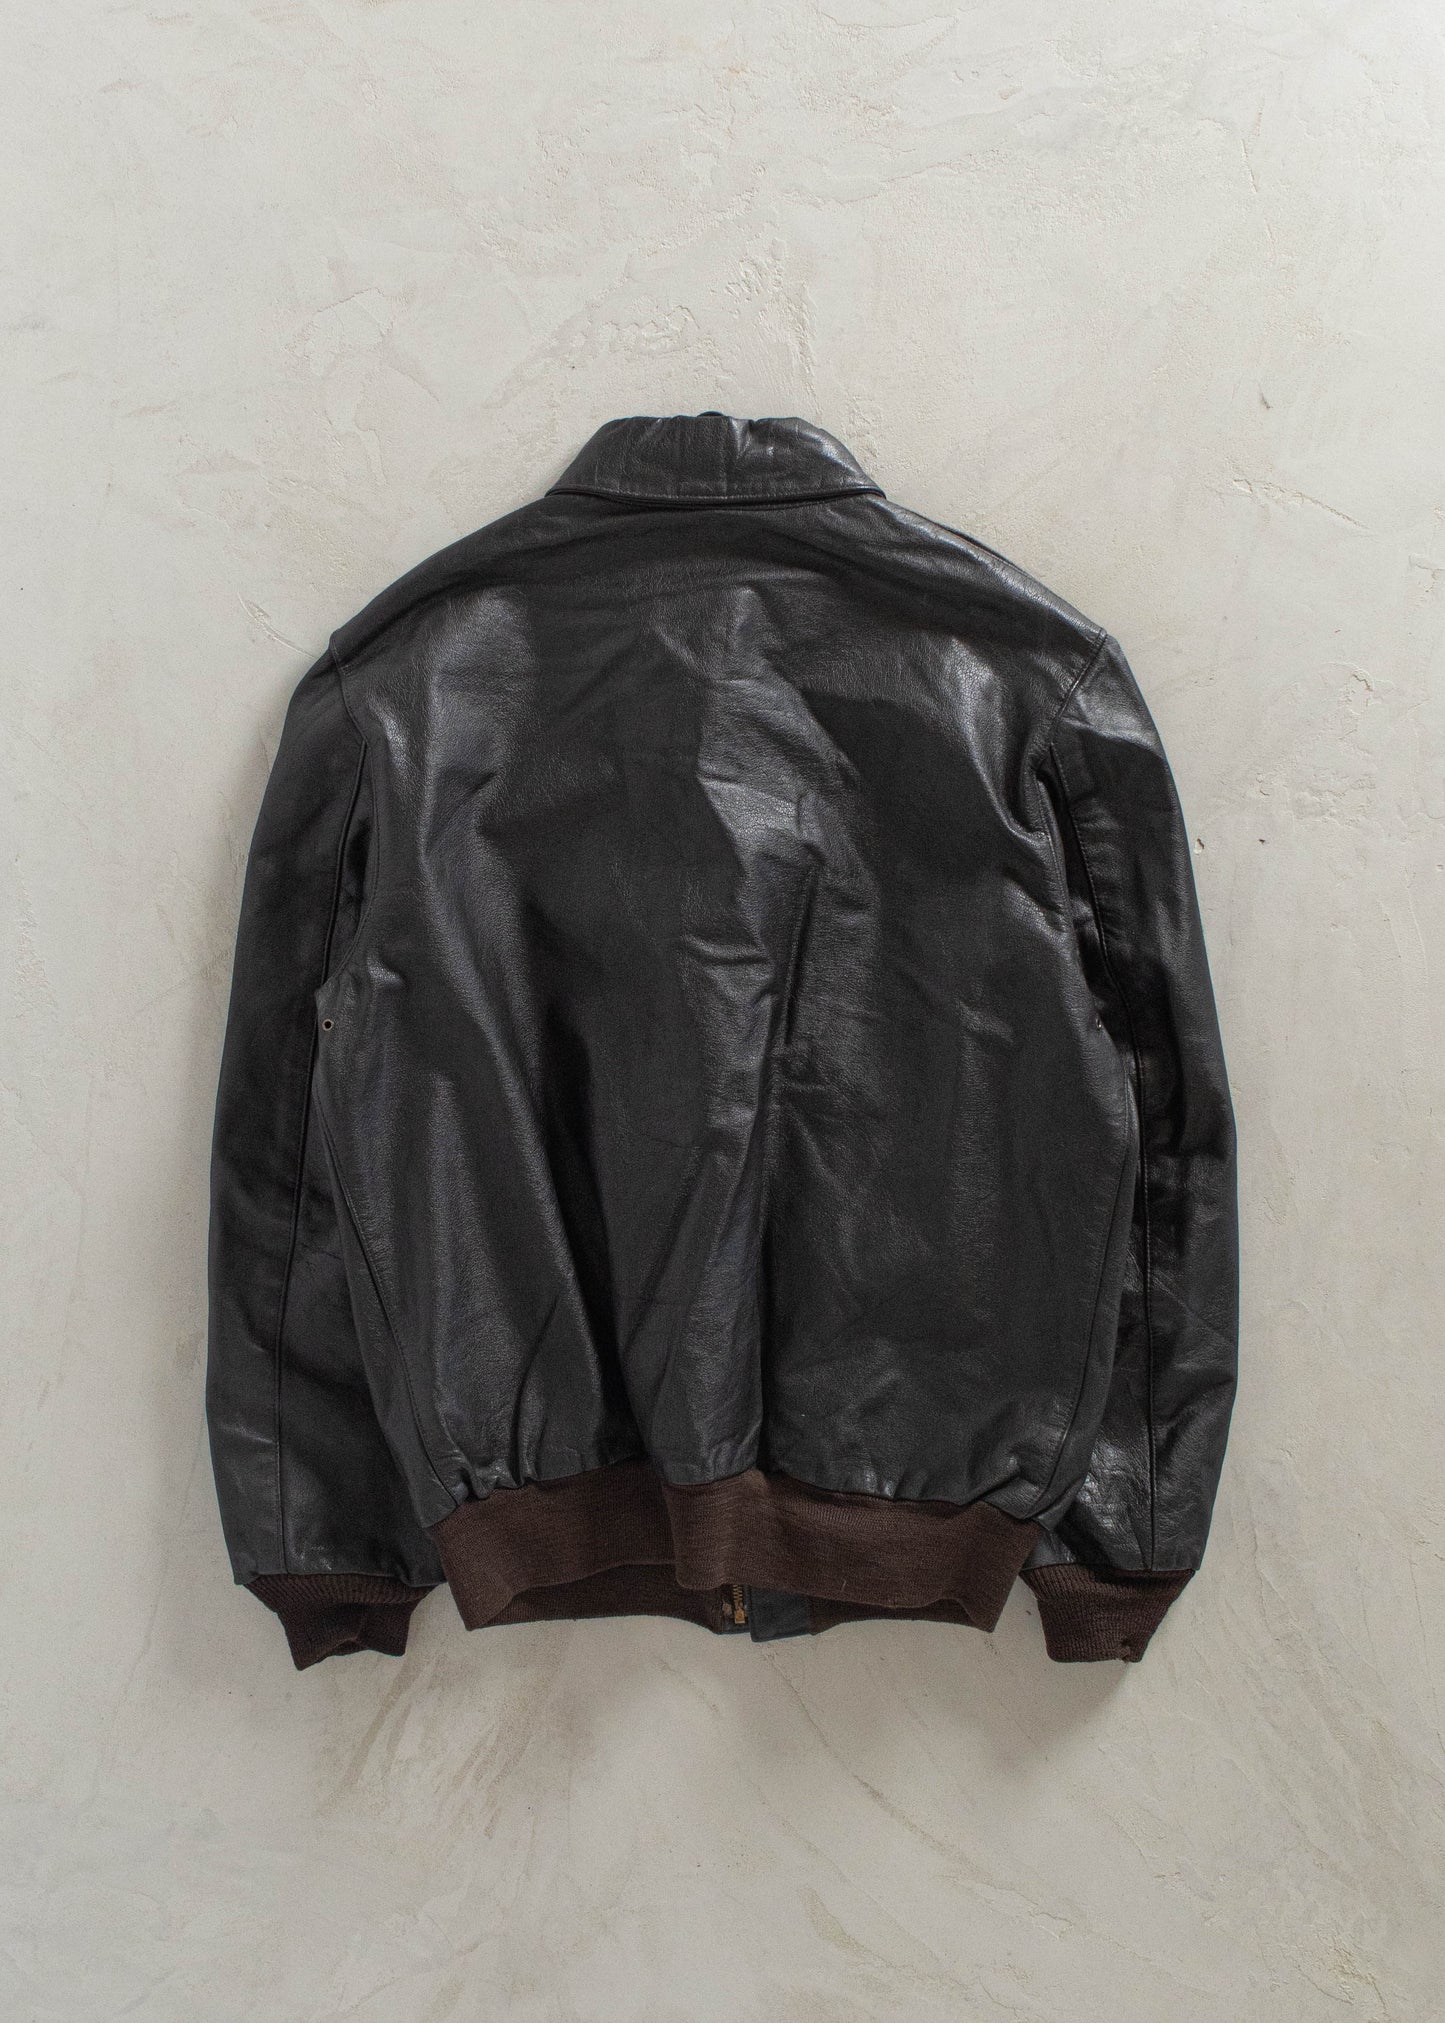 1980s Wearguard Type A-2 Air Force Leather Bomber Jacket Size M/L